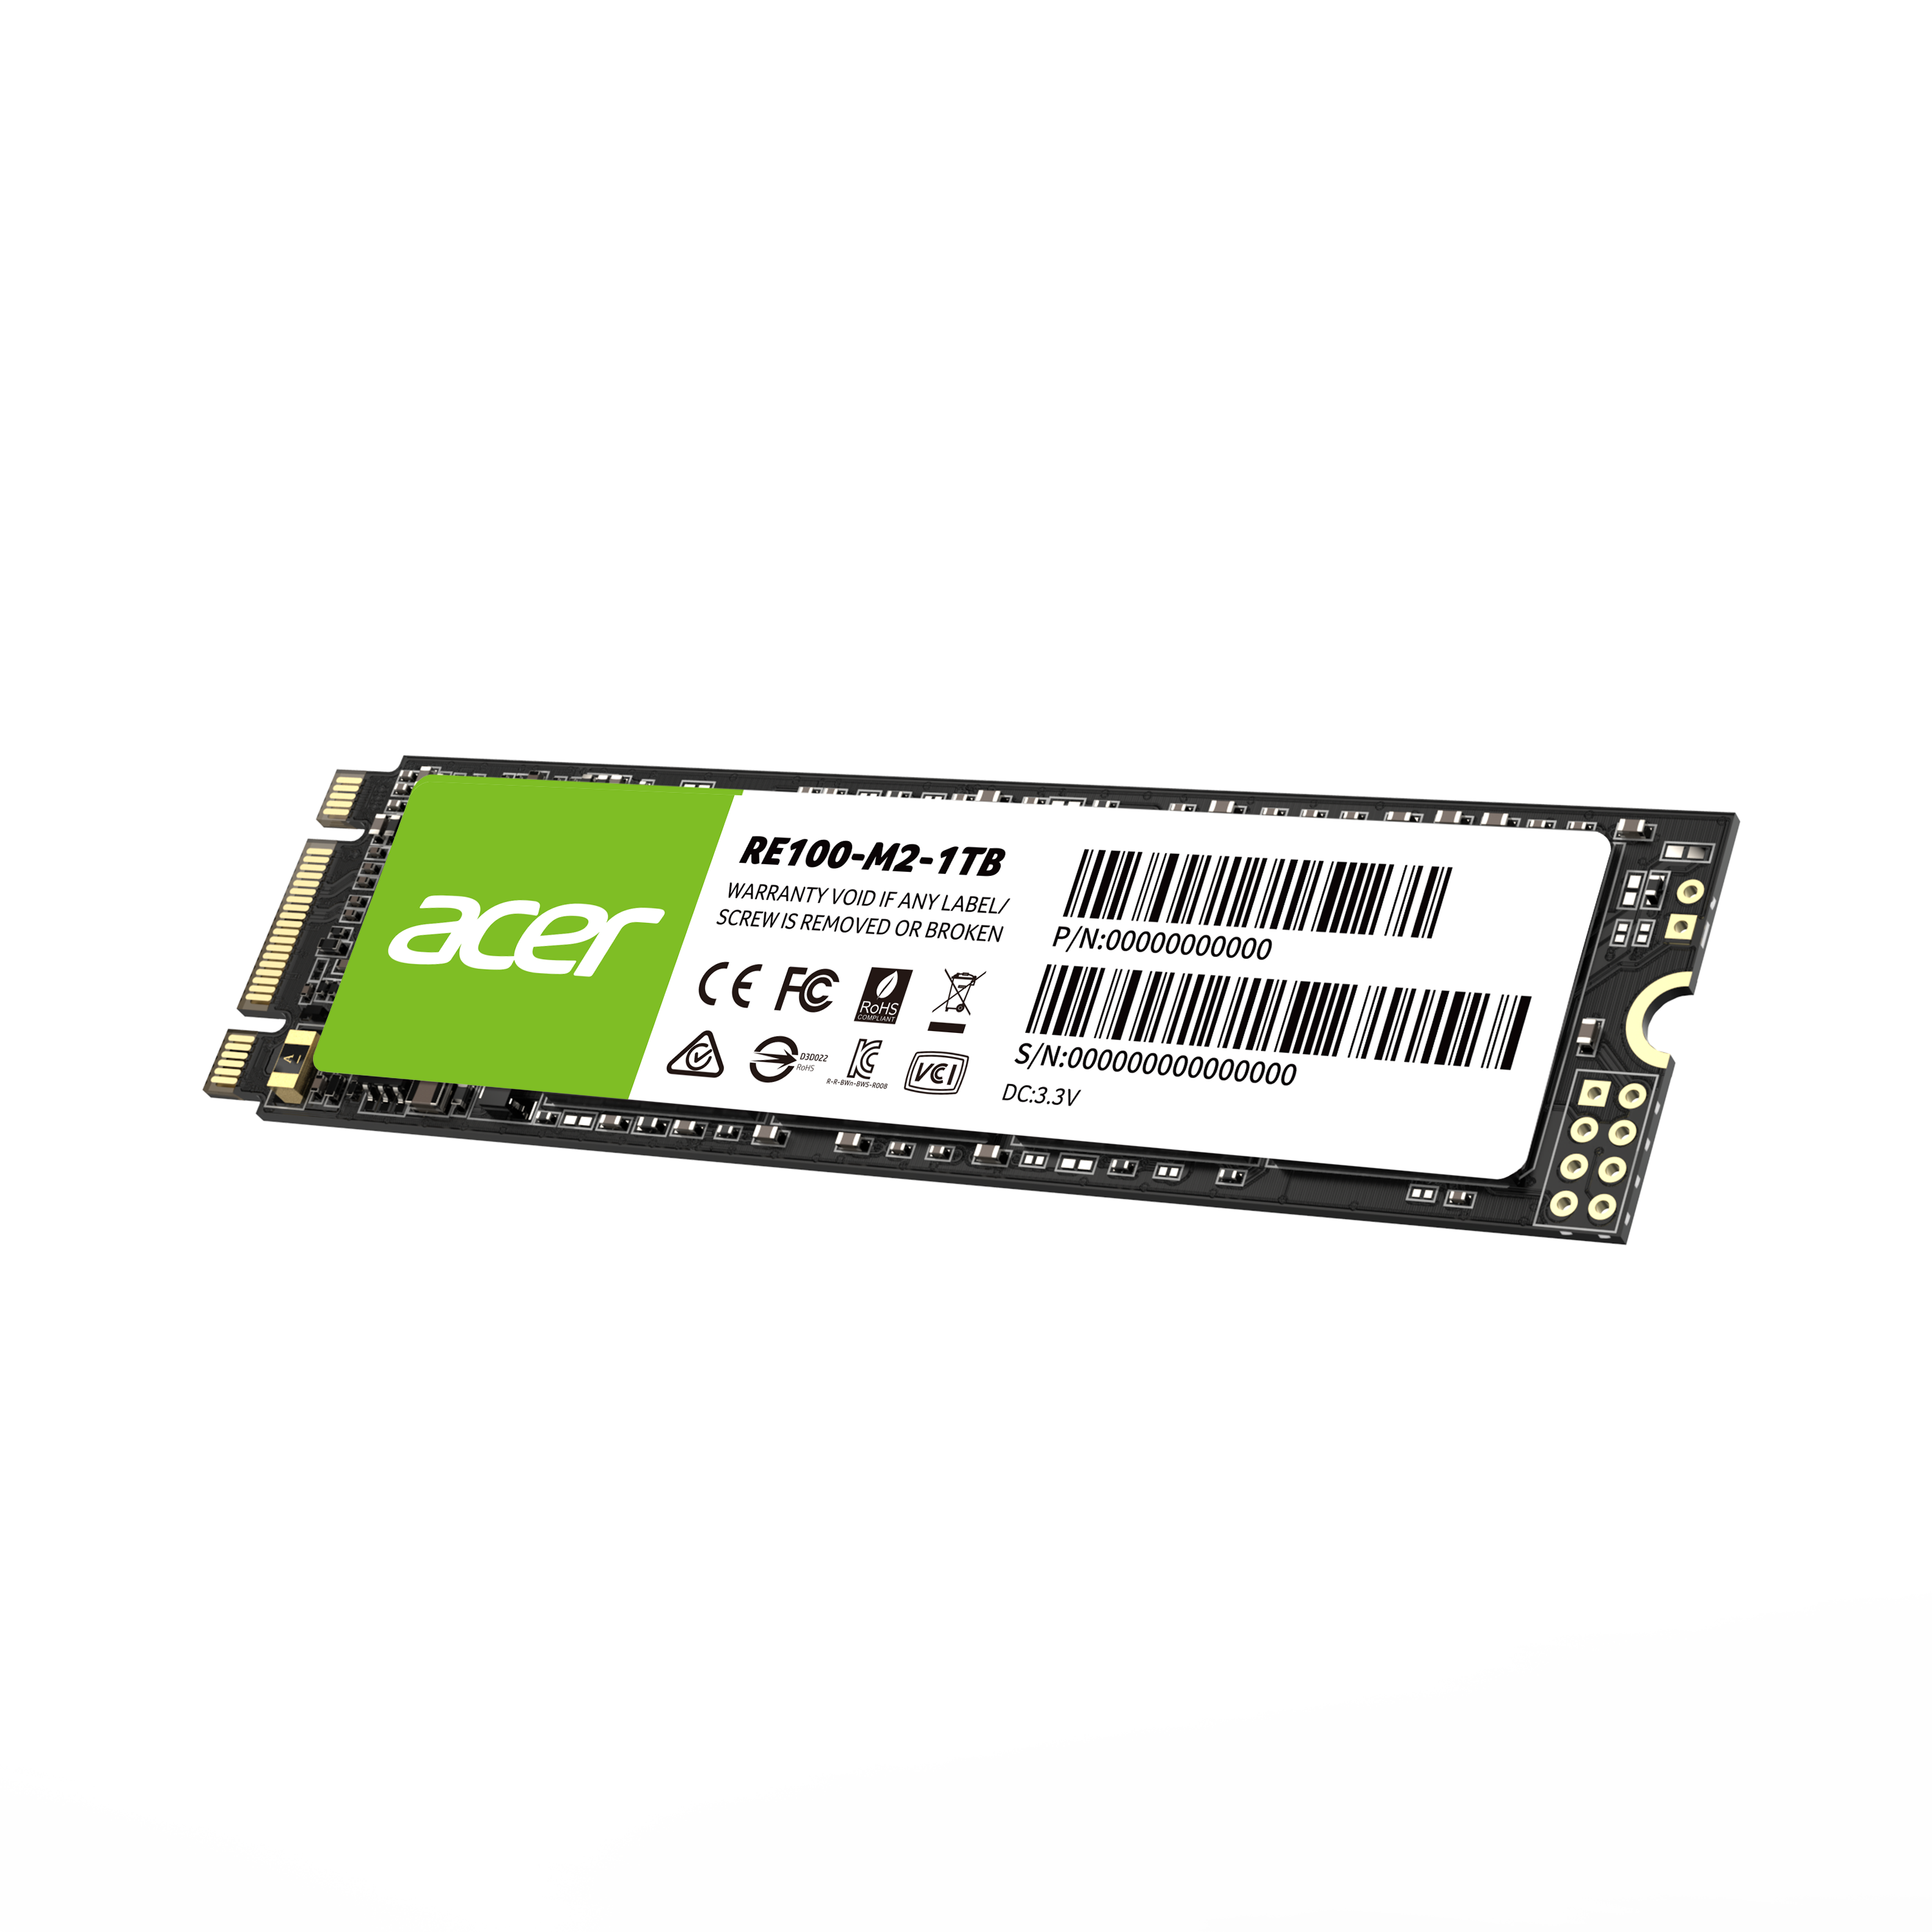 Acer RE100 M.2 SSD provides high speed and saves energy to protect environment